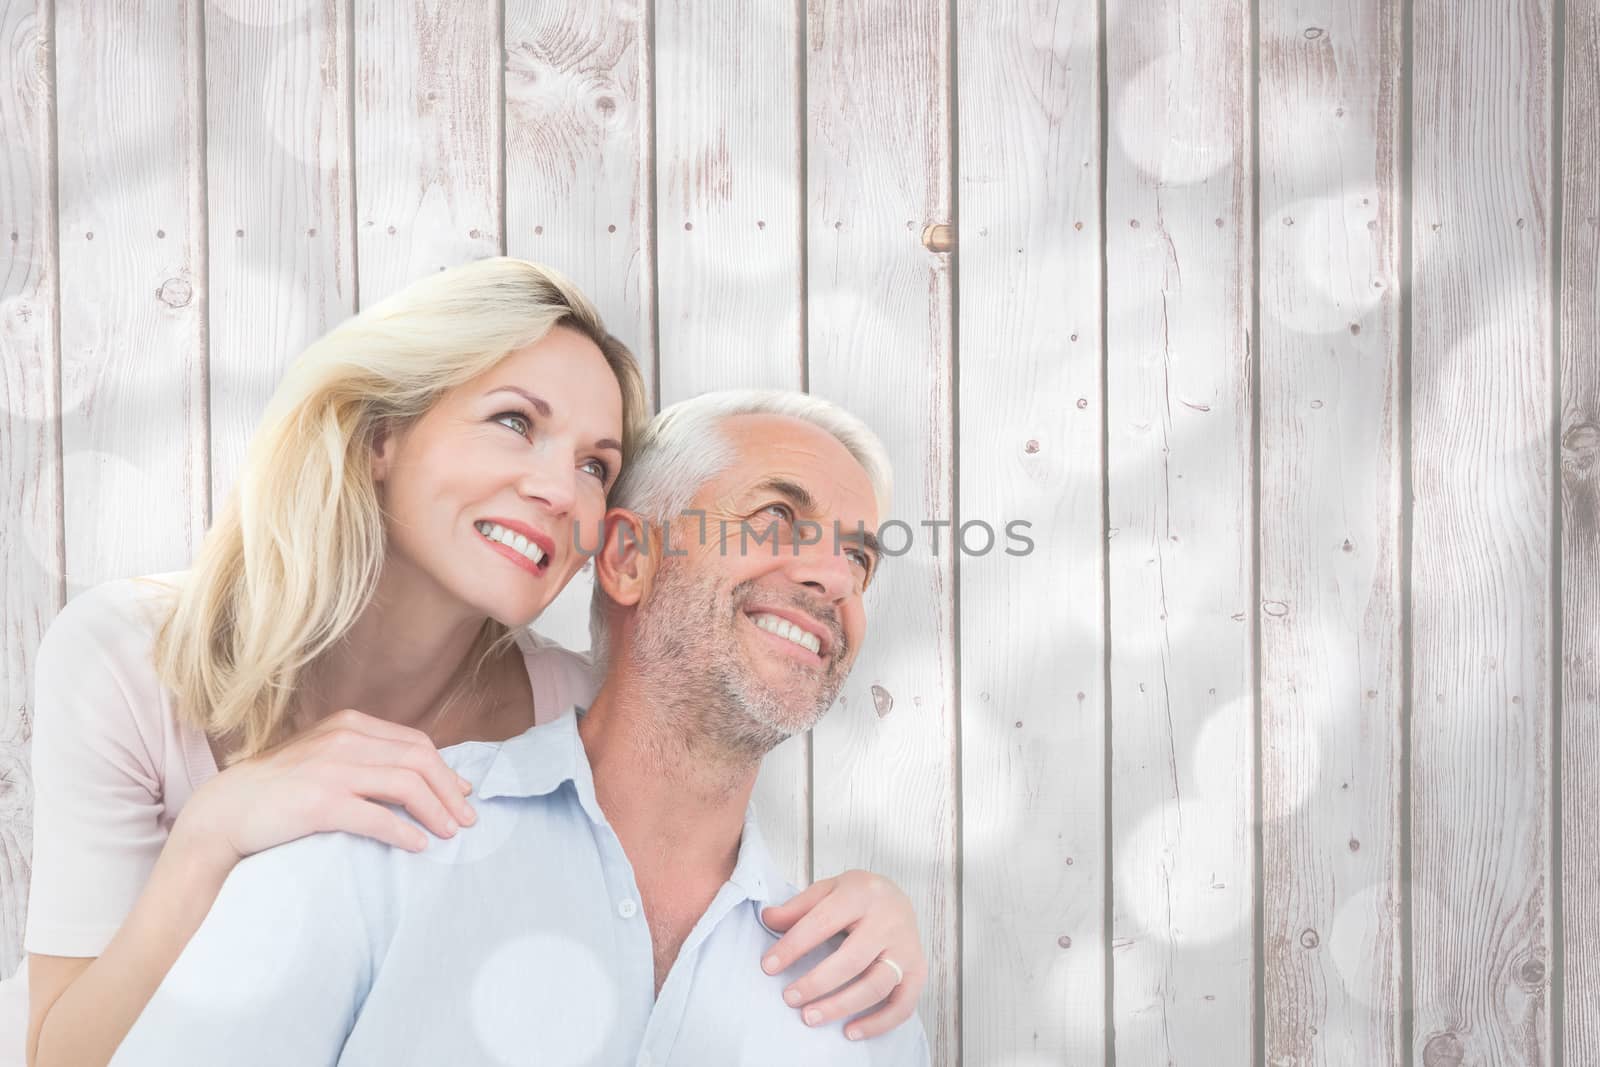 Smiling couple embracing and looking  against light circles on grey background